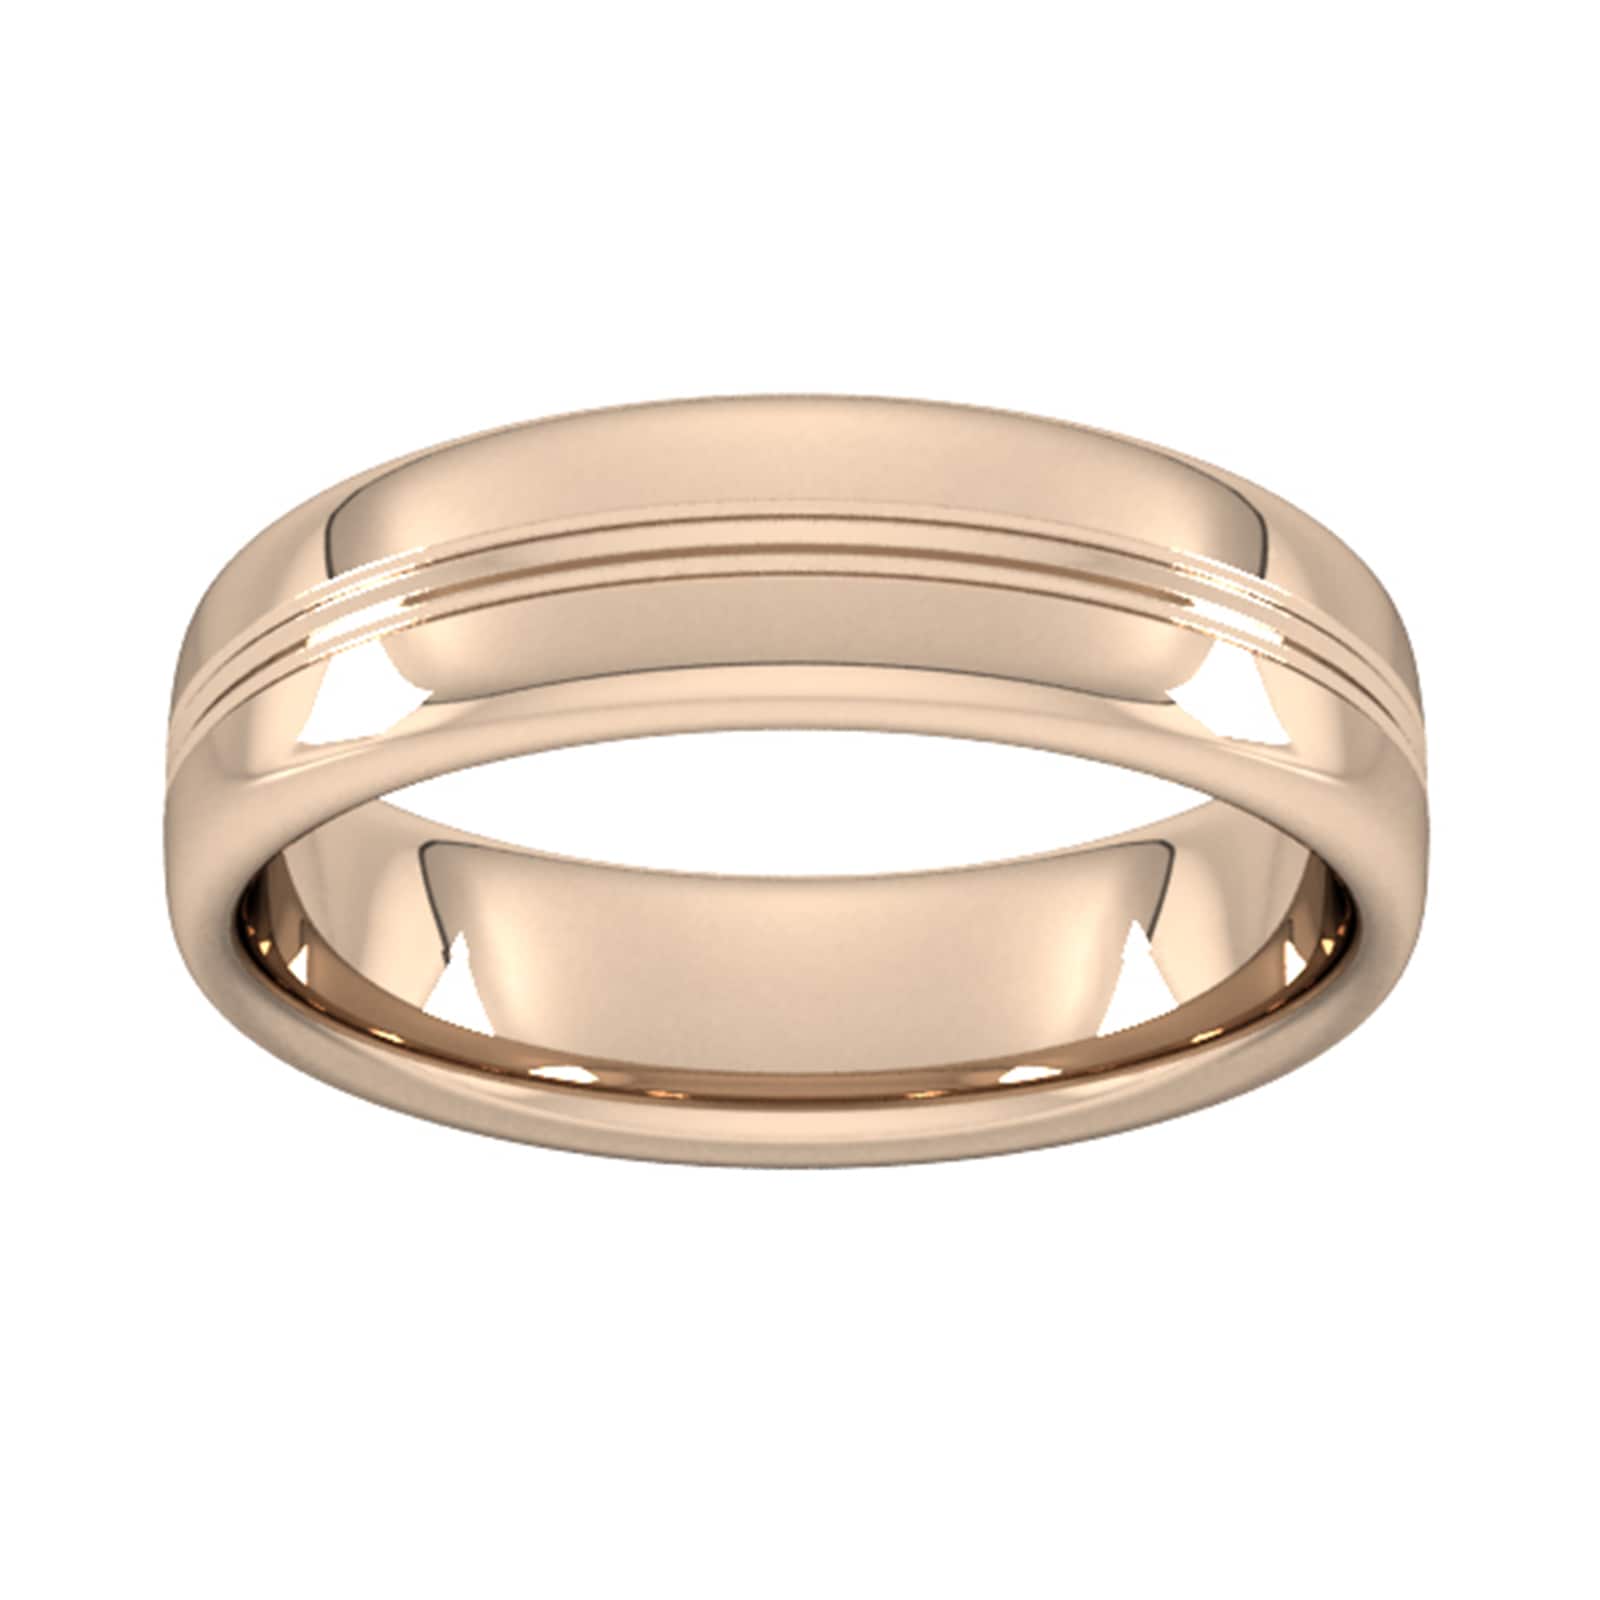 6mm Slight Court Heavy Grooved Polished Finish Wedding Ring In 9 Carat Rose Gold - Ring Size O